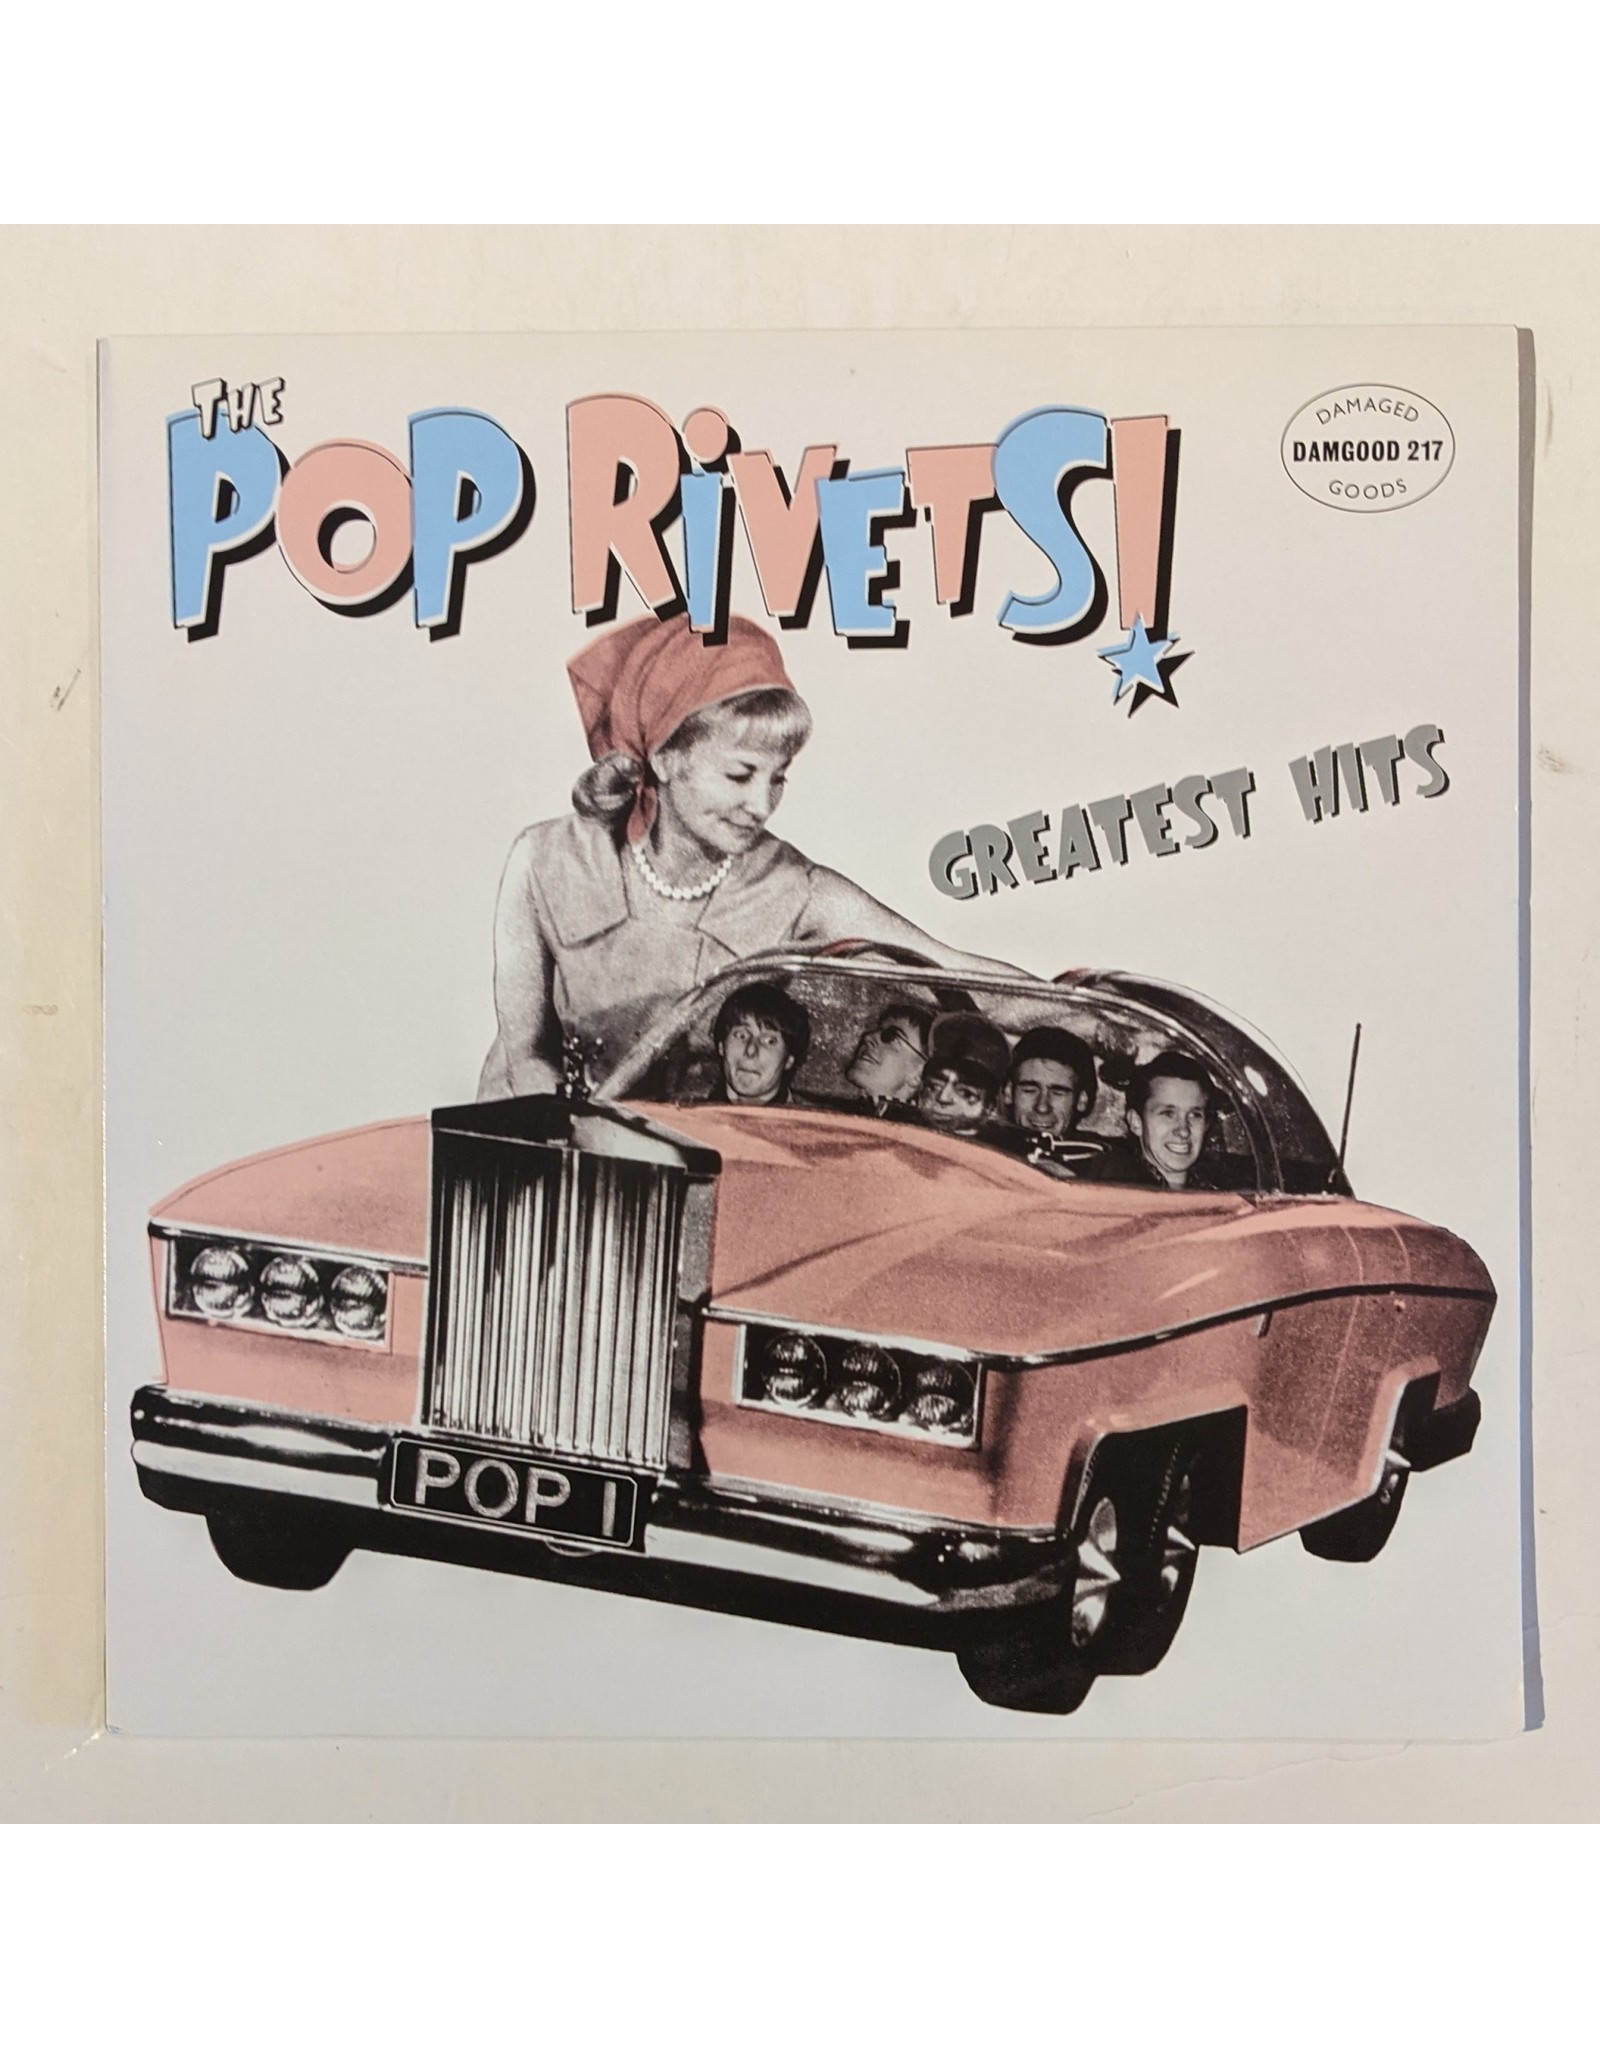 USED: Pop Rivets: Greatest Hits LP